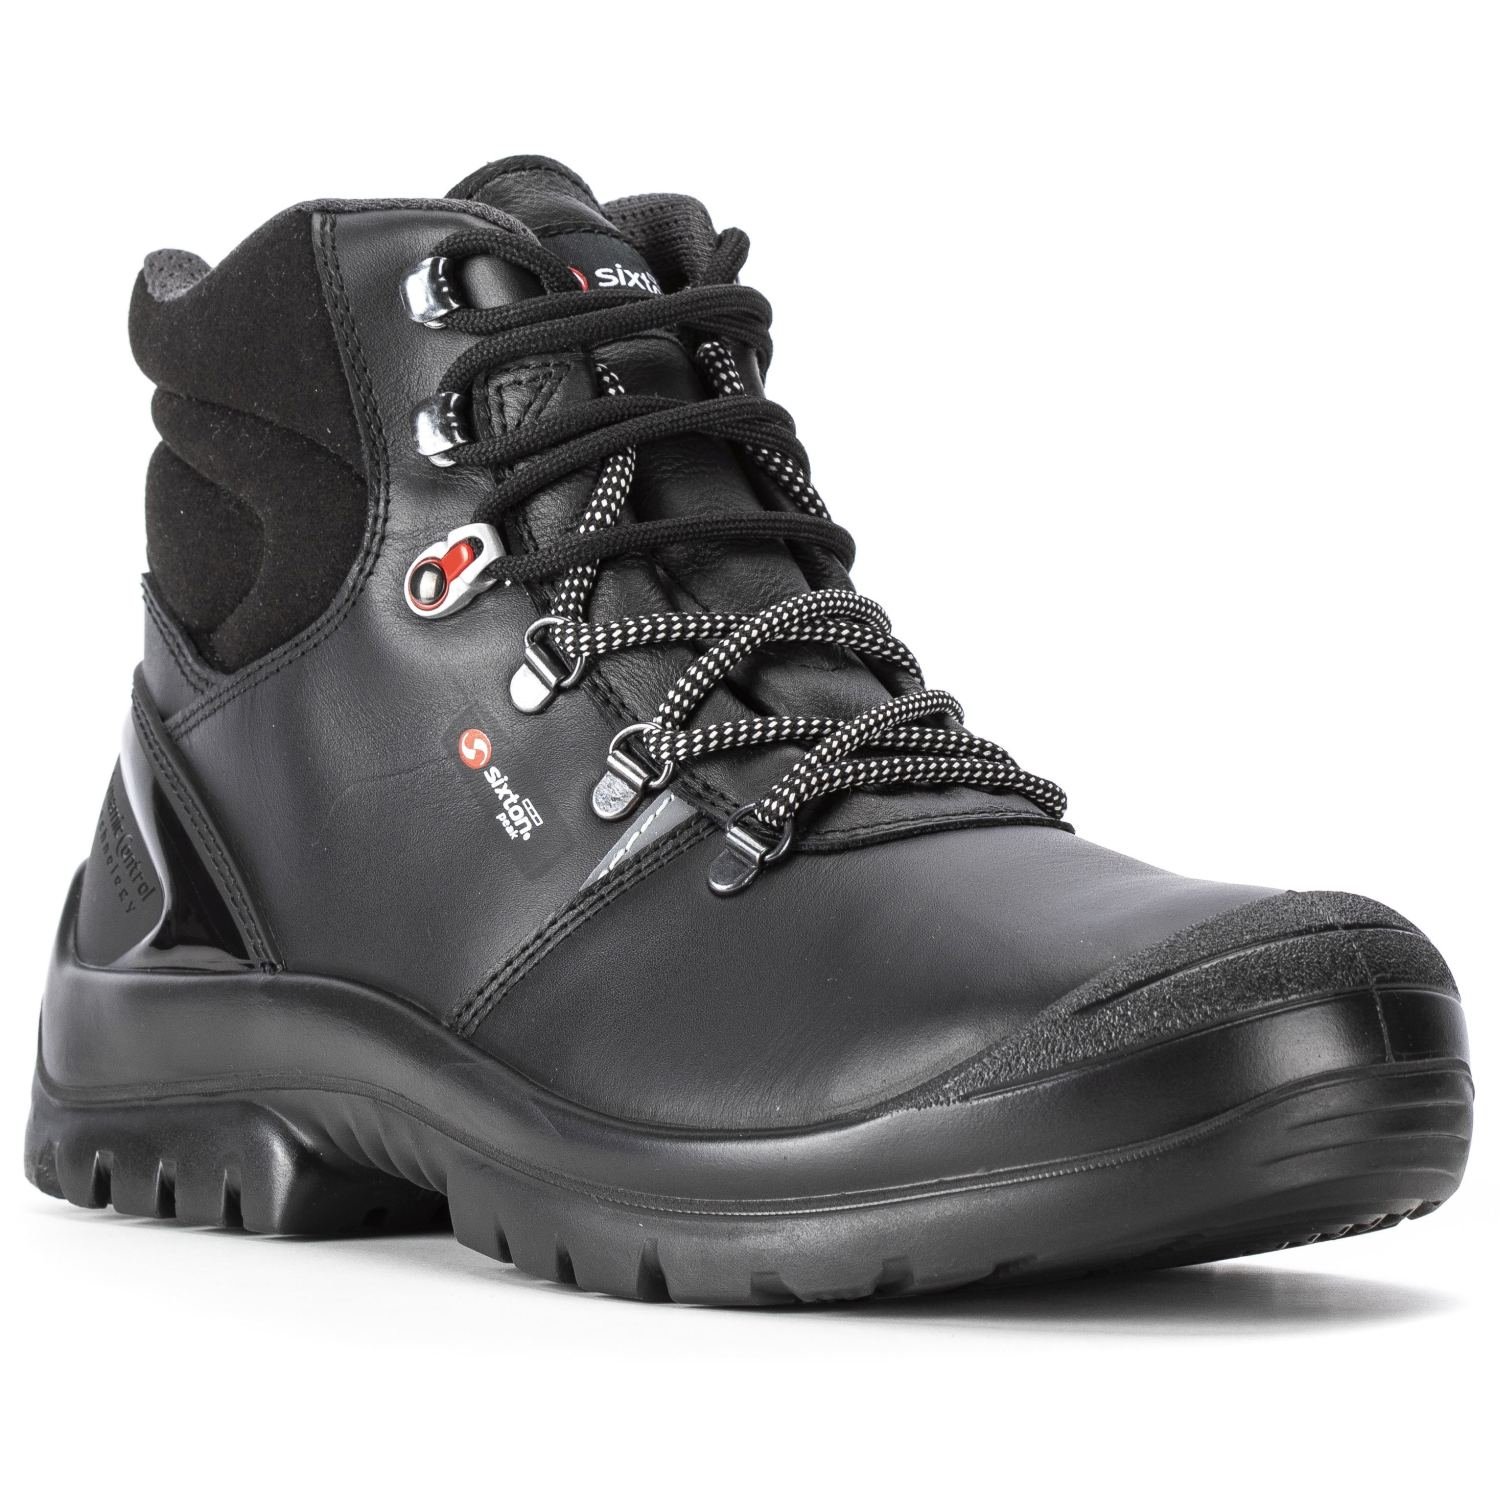 Sixton Peak Steel Anti-Penetration Midsole Lace Up Ankle Safety Boot